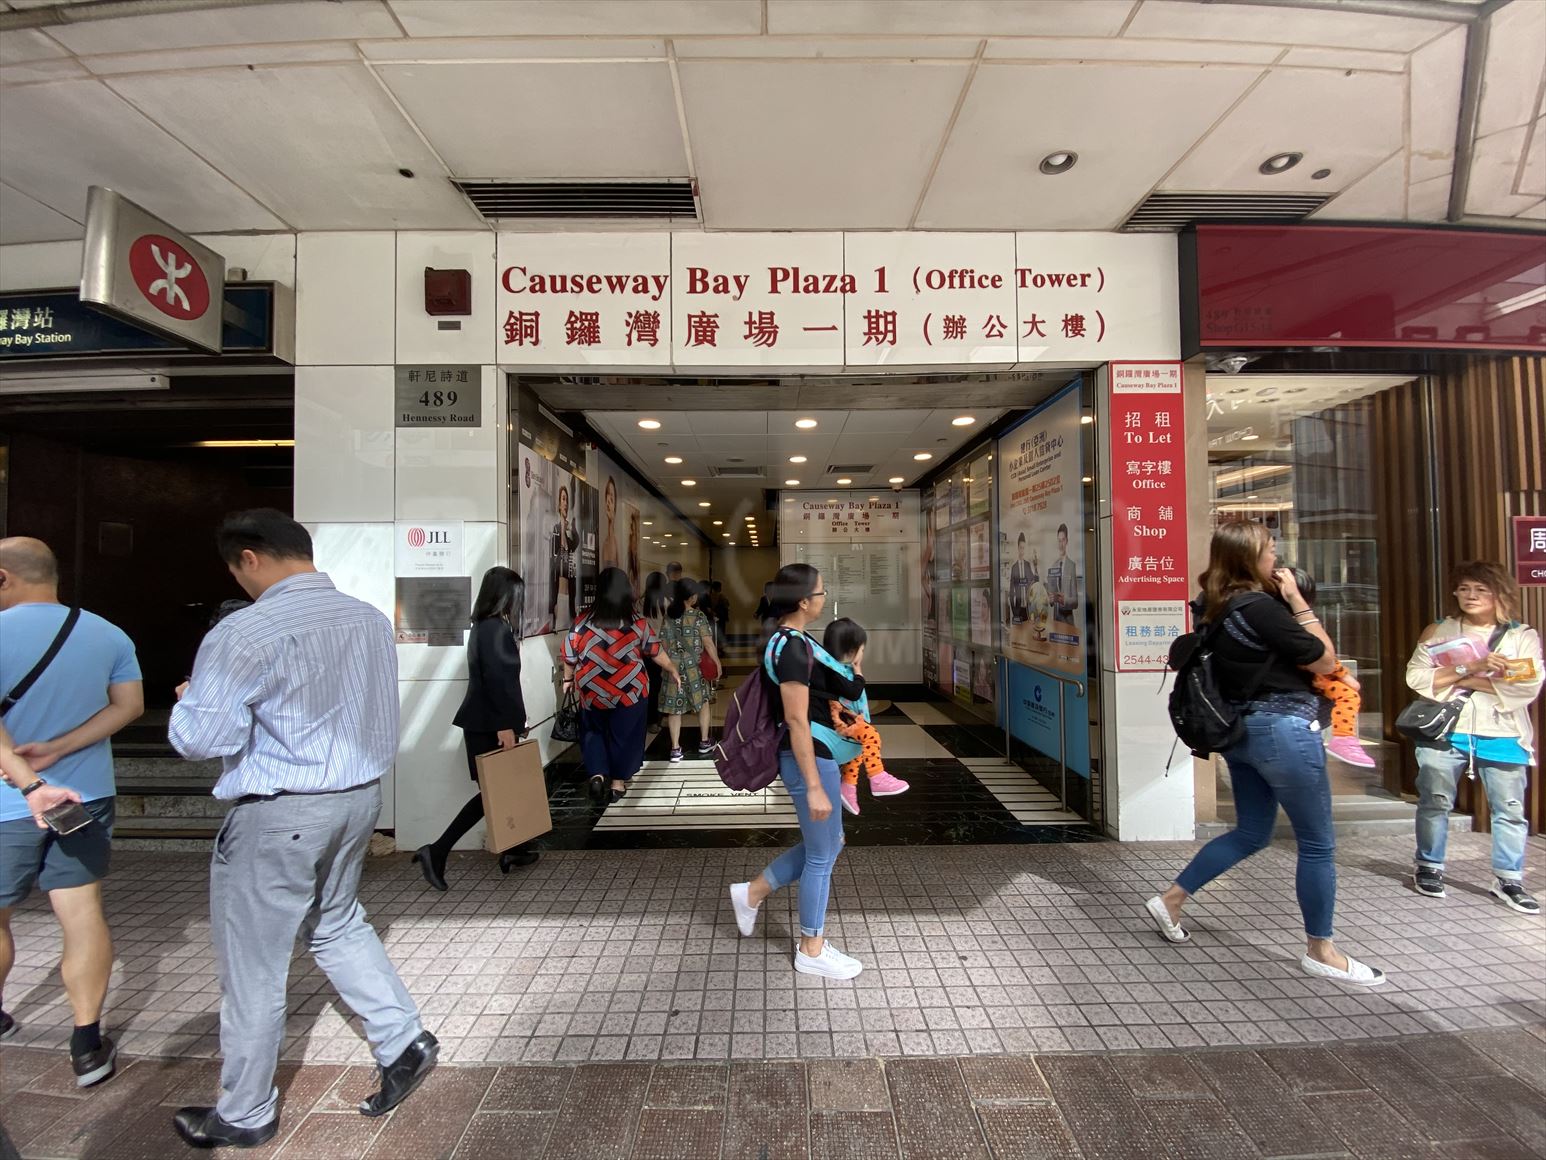 Causeway Bay Plaza 1 Property Database - Office, Industrial and Retail  property for lease or sale - Centaline Commercial